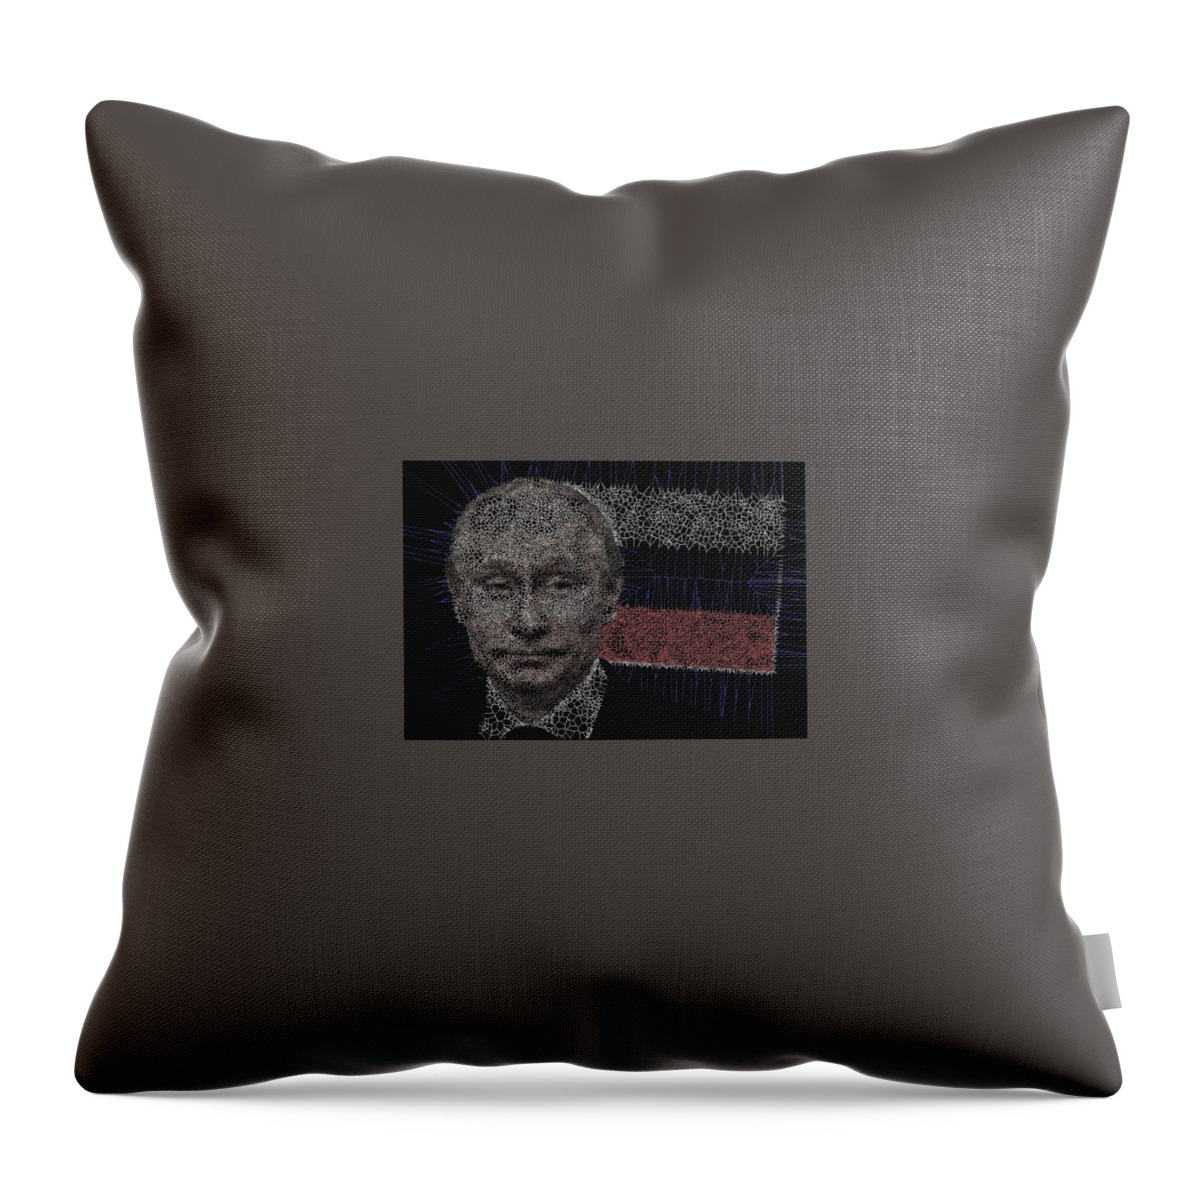 Vorotrans Throw Pillow featuring the digital art Territory by Stephane Poirier